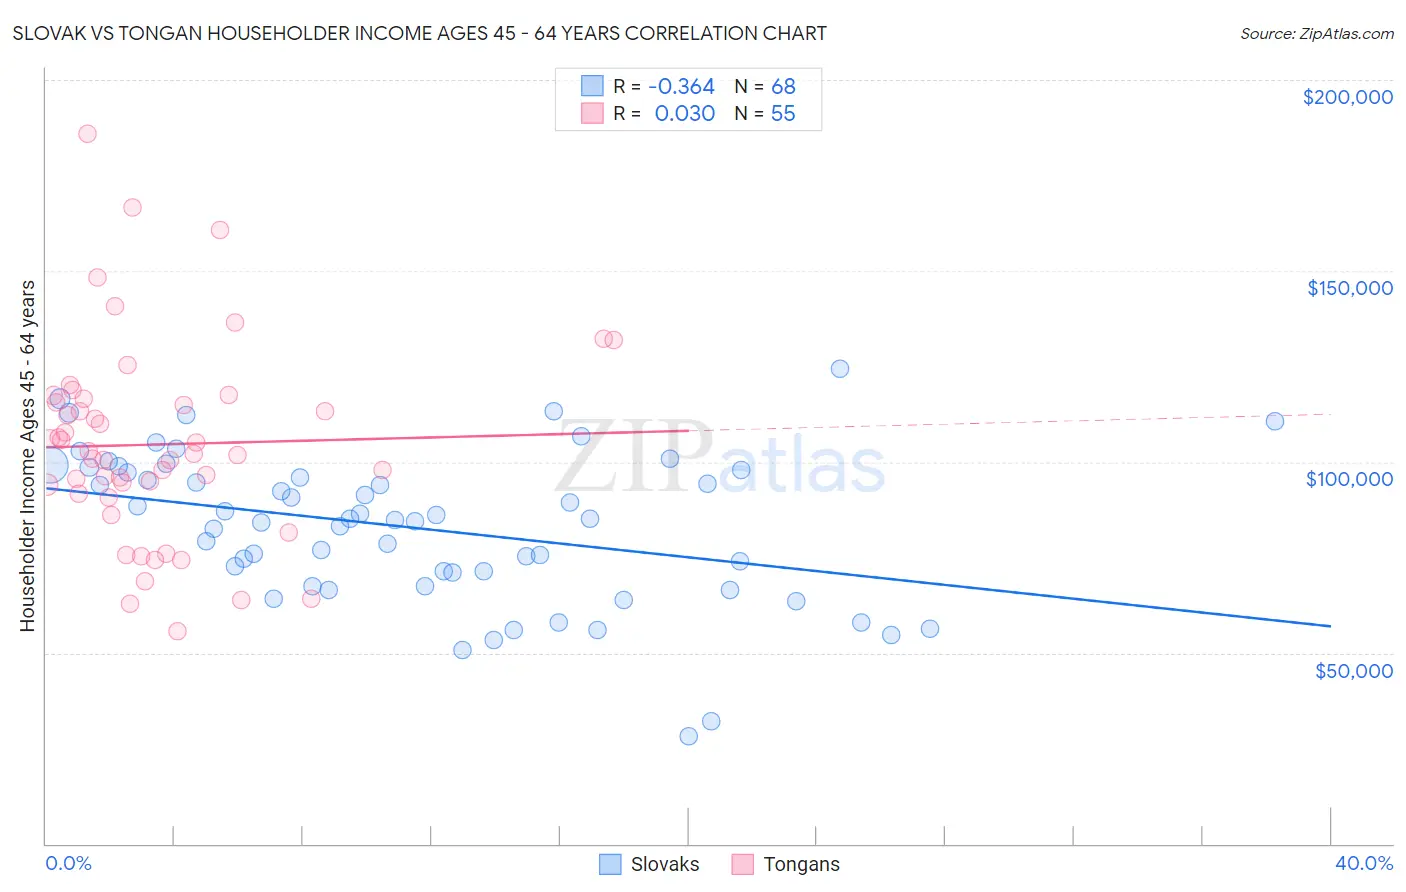 Slovak vs Tongan Householder Income Ages 45 - 64 years